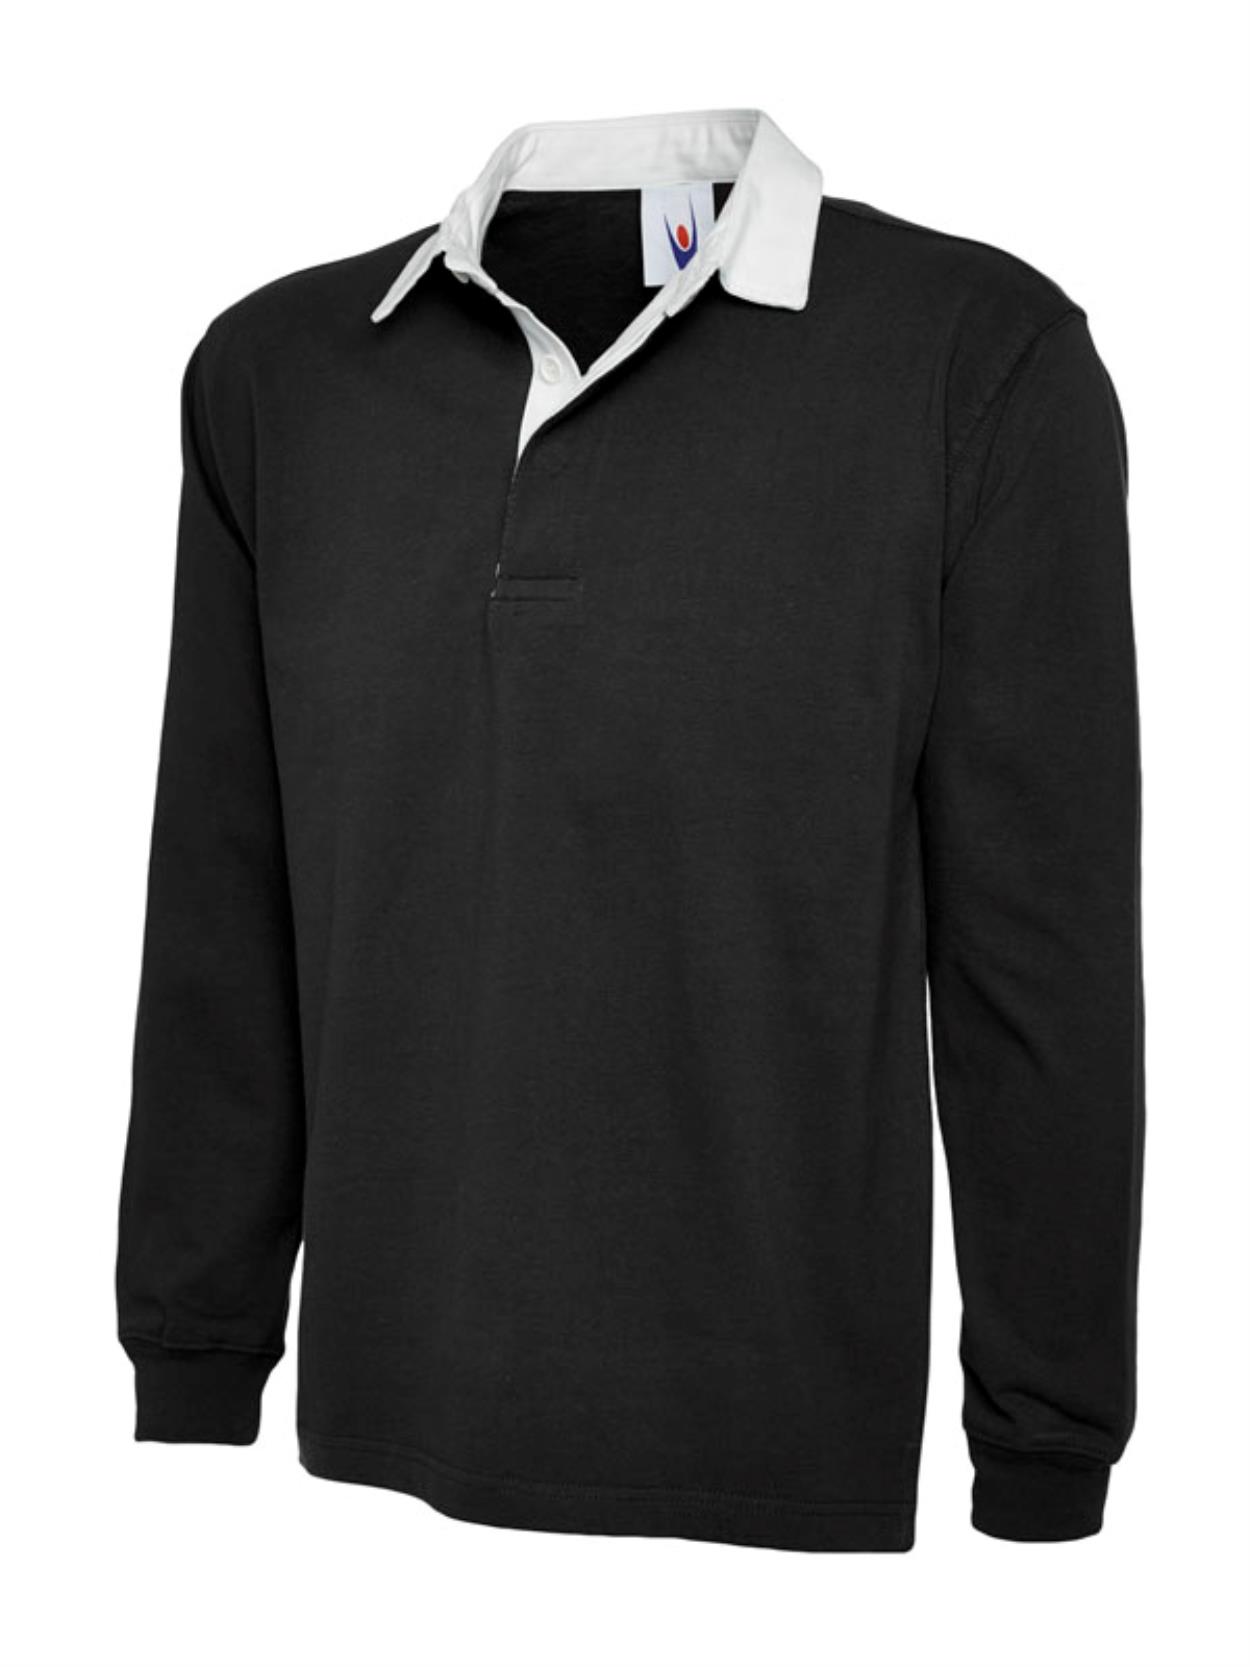 UC402 Classic Rugby Shirt Image 1